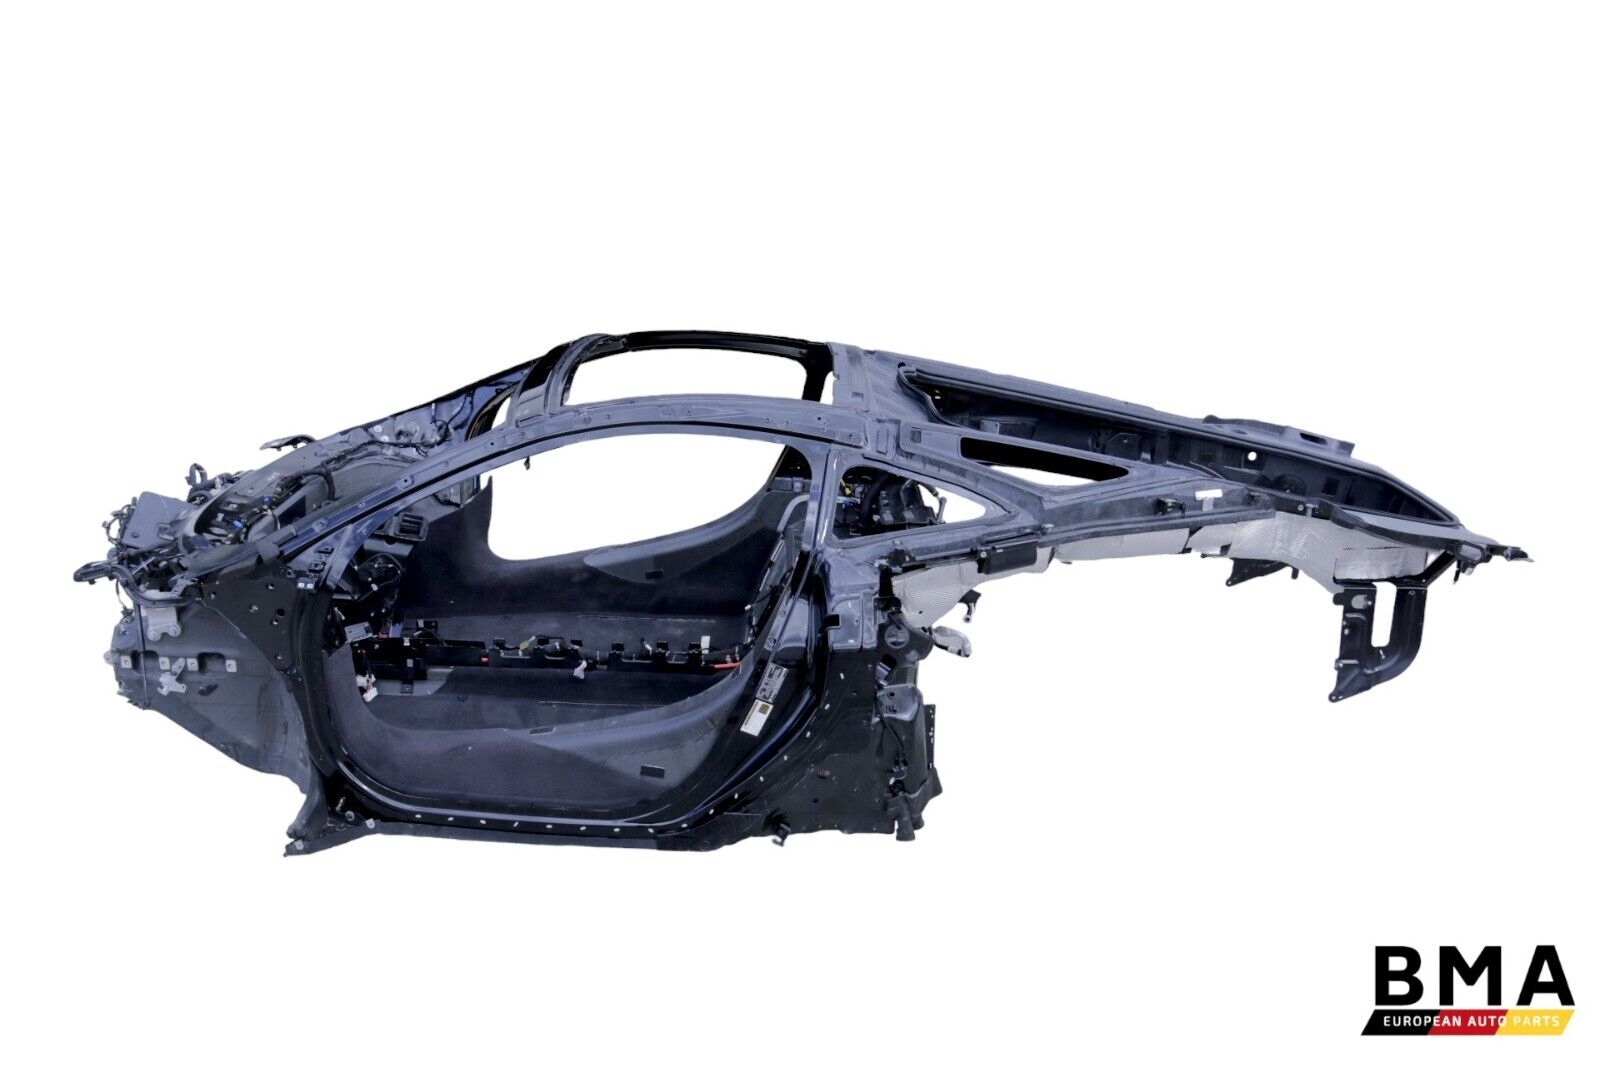 McLaren GT Coupe Carbon Fiber Monocell Hull Tub Cockpit Chassis 2022